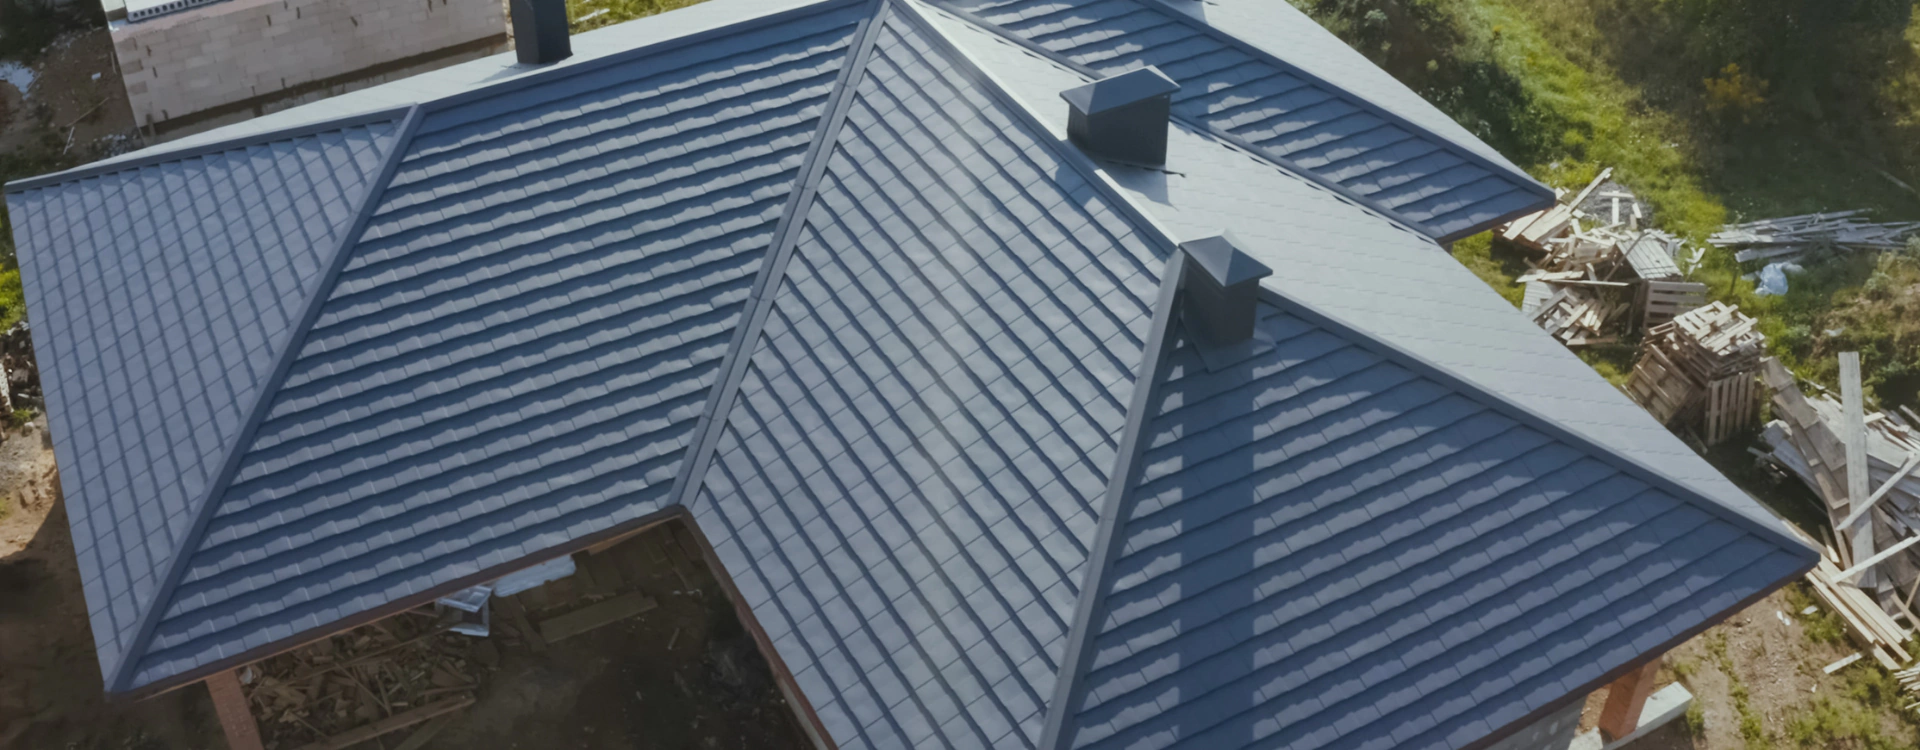 top view roof